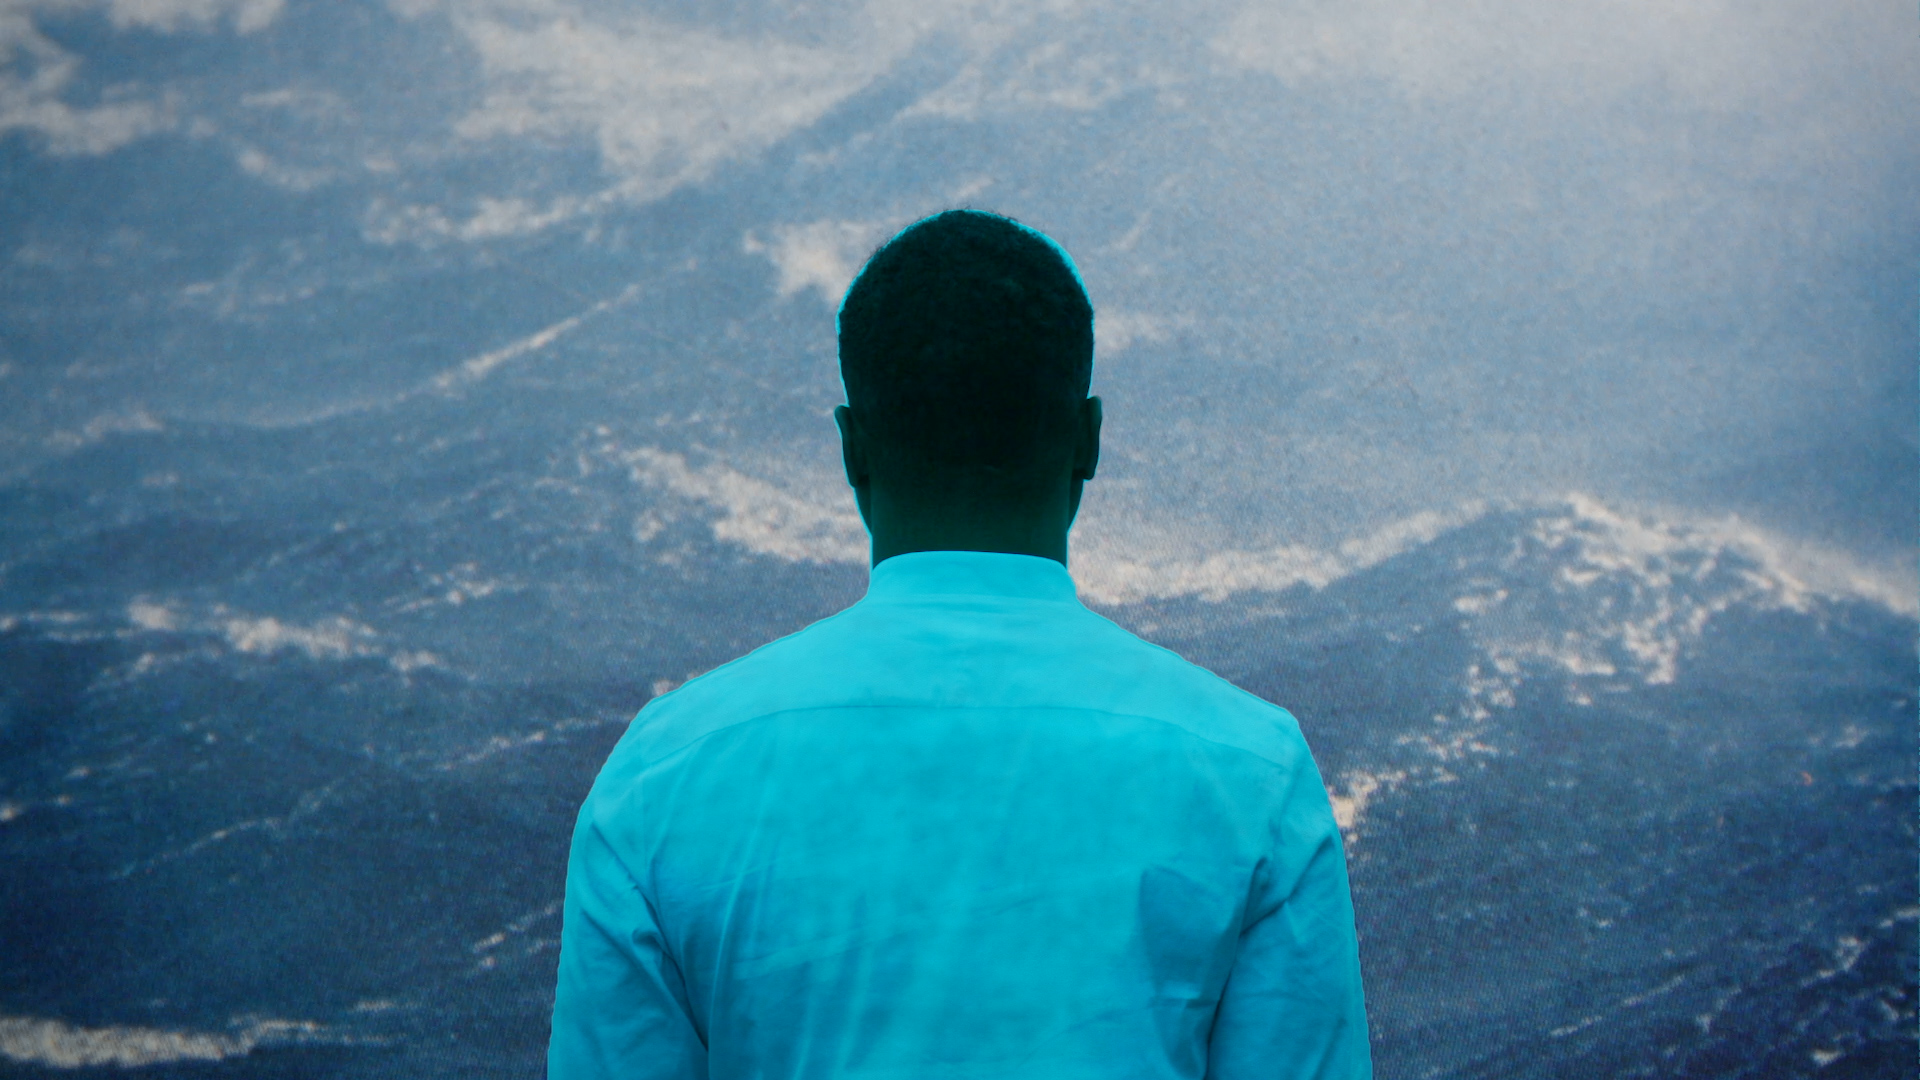 A still from After Sherman shows a Black person, their back to the camera, looking out at an expansive mountain range.